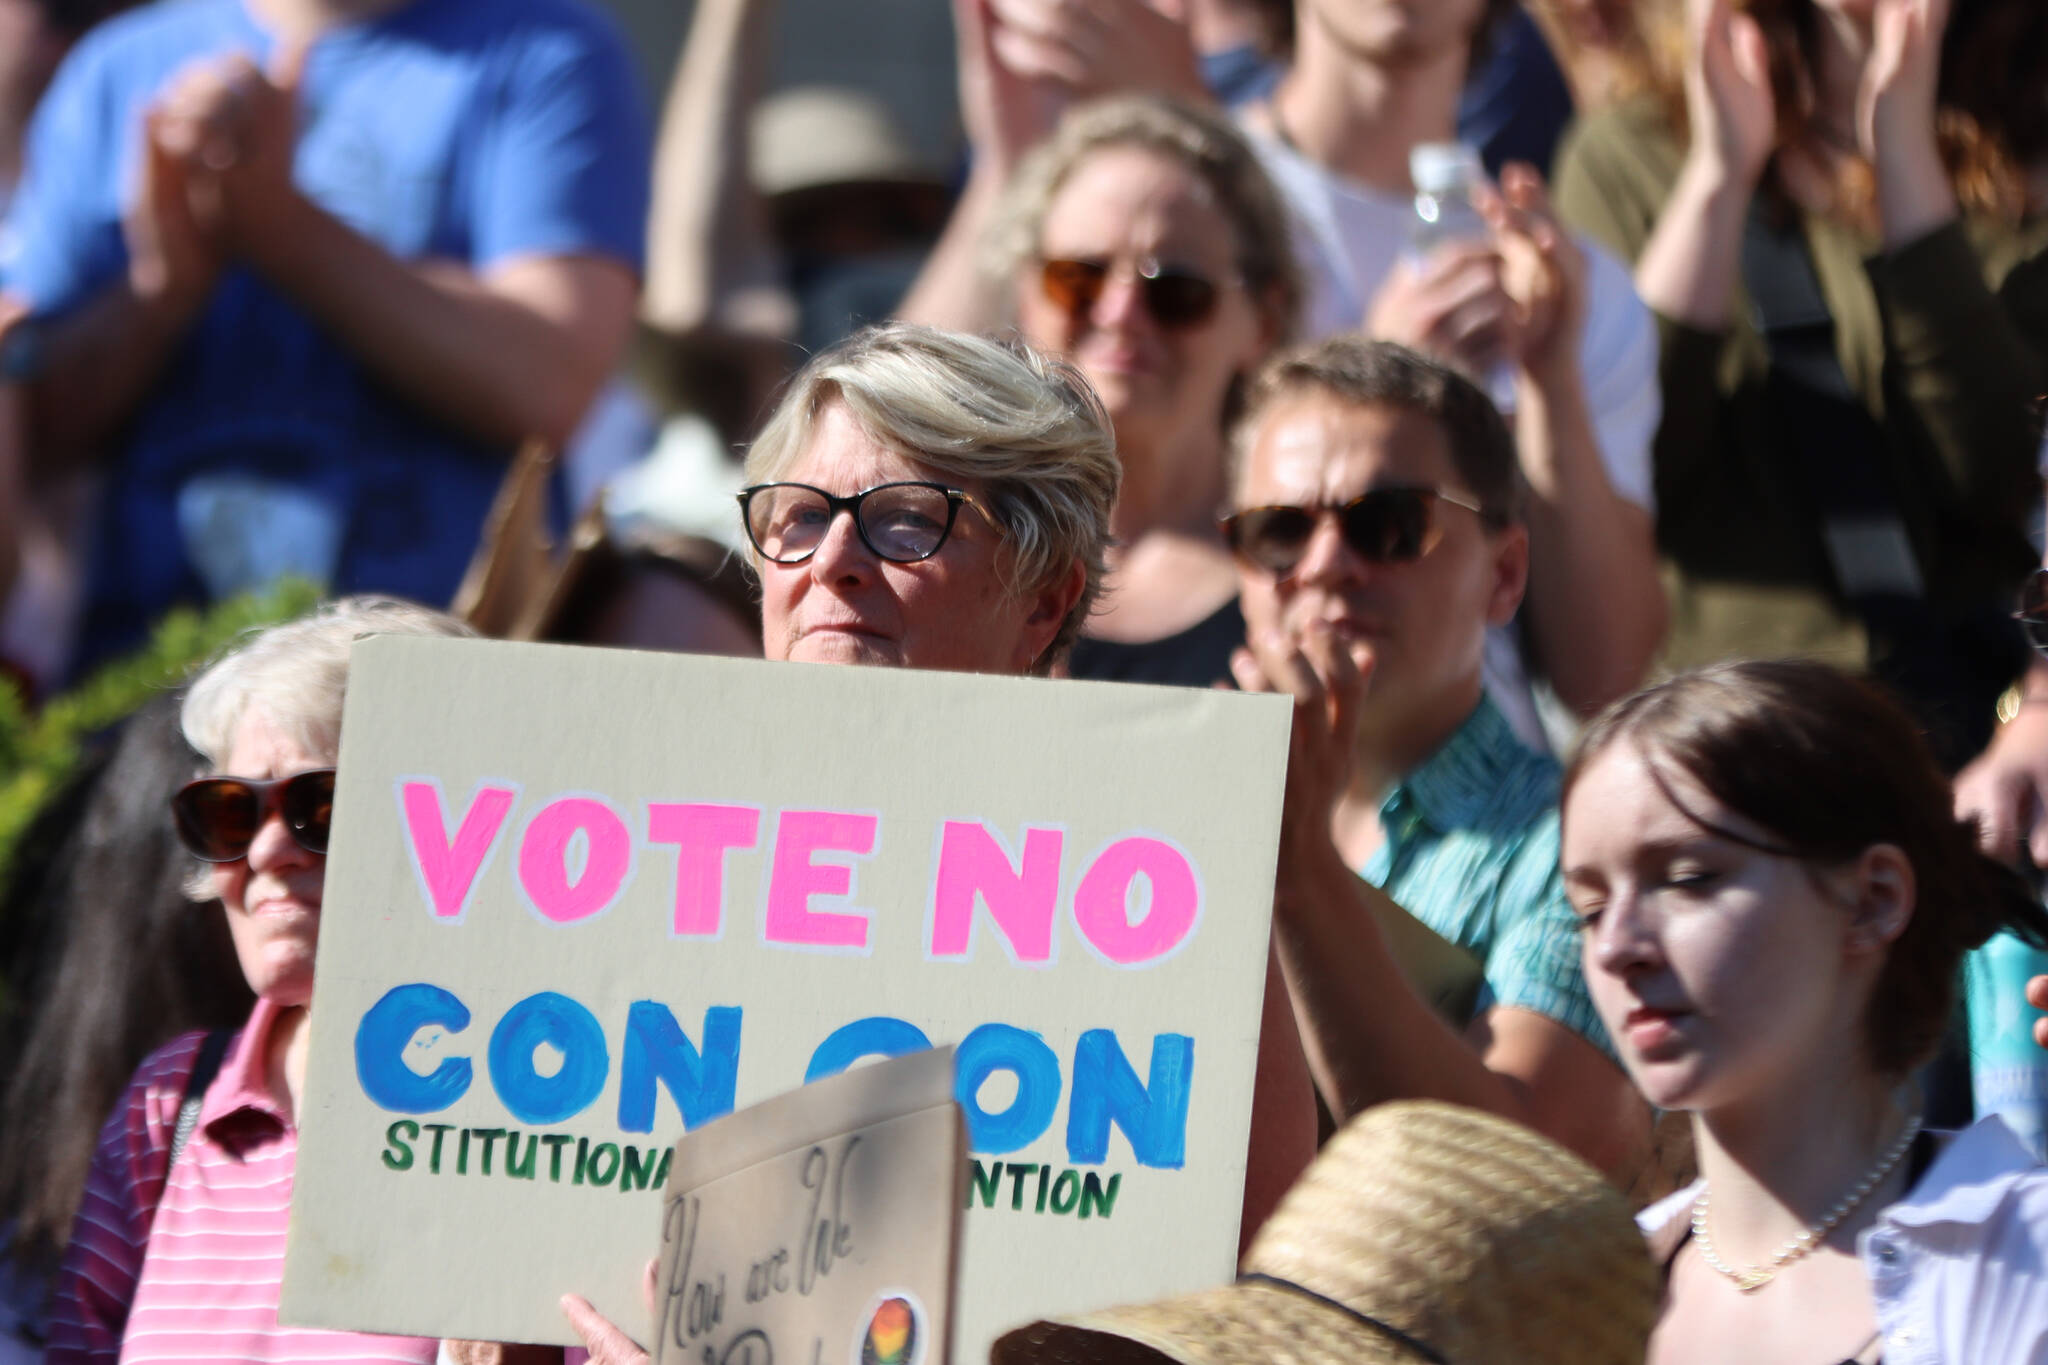 Former Democratic state Rep. Beth Kerttula holds up a sign reading “Vote No Con Con,” during a rally at the Dimond Courthouse Plaza in Juneau. (Ben Hohenstatt / Juneau Empire)